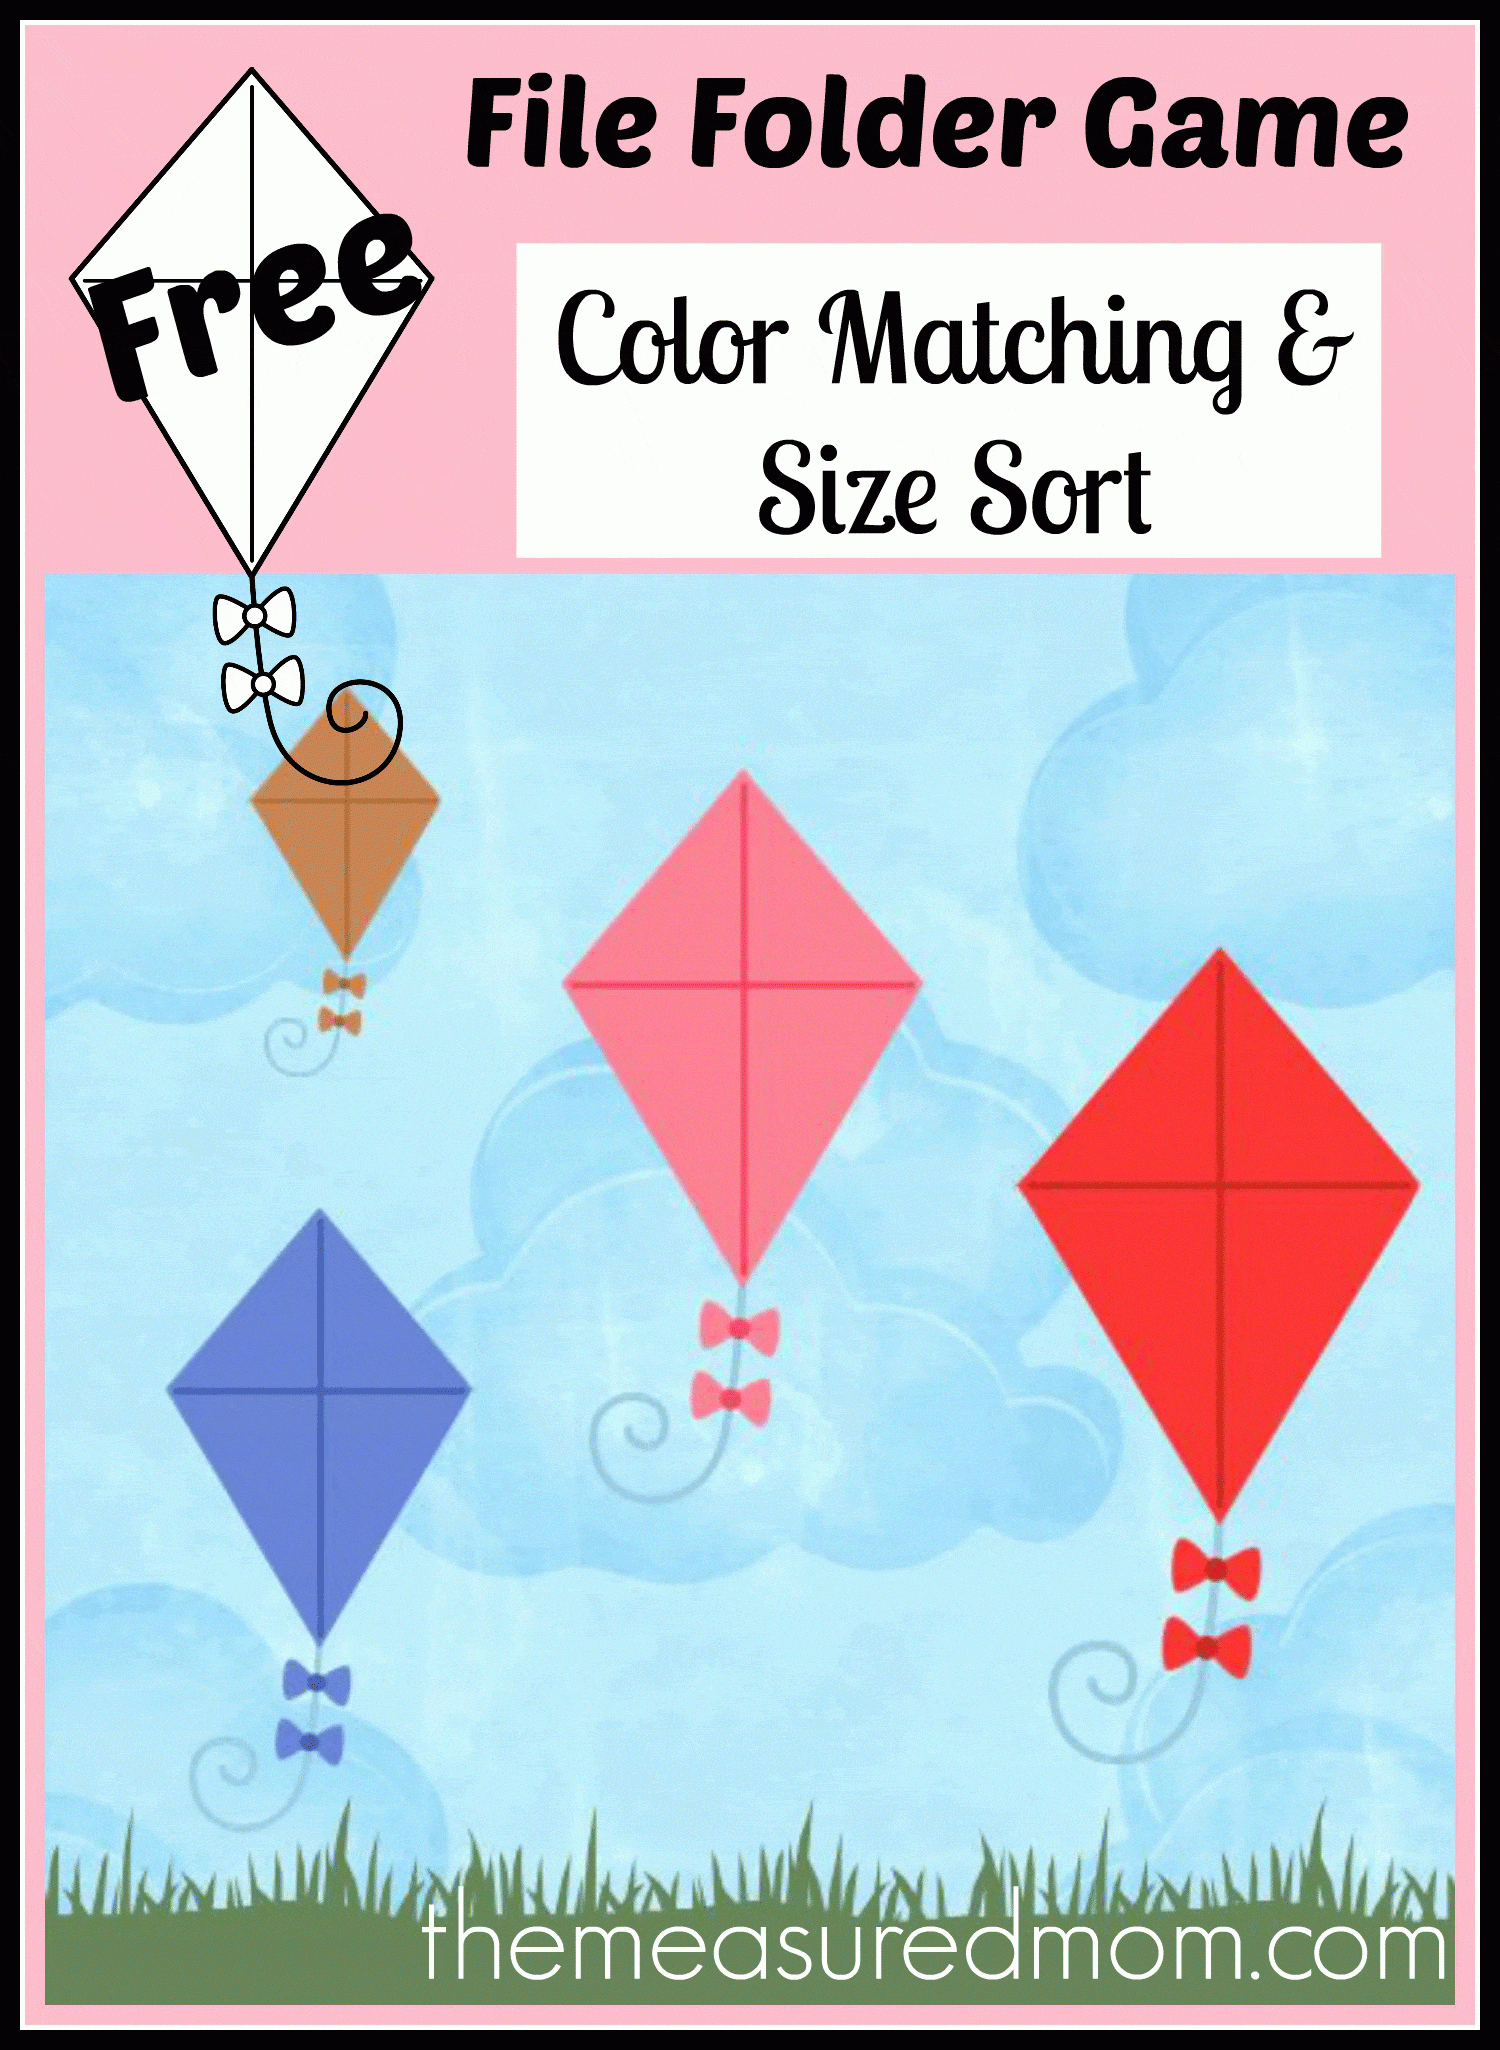 Free File Folder Game For Preschoolers: Kites! - The Measured Mom in File Folder Games For Toddlers Free Printable